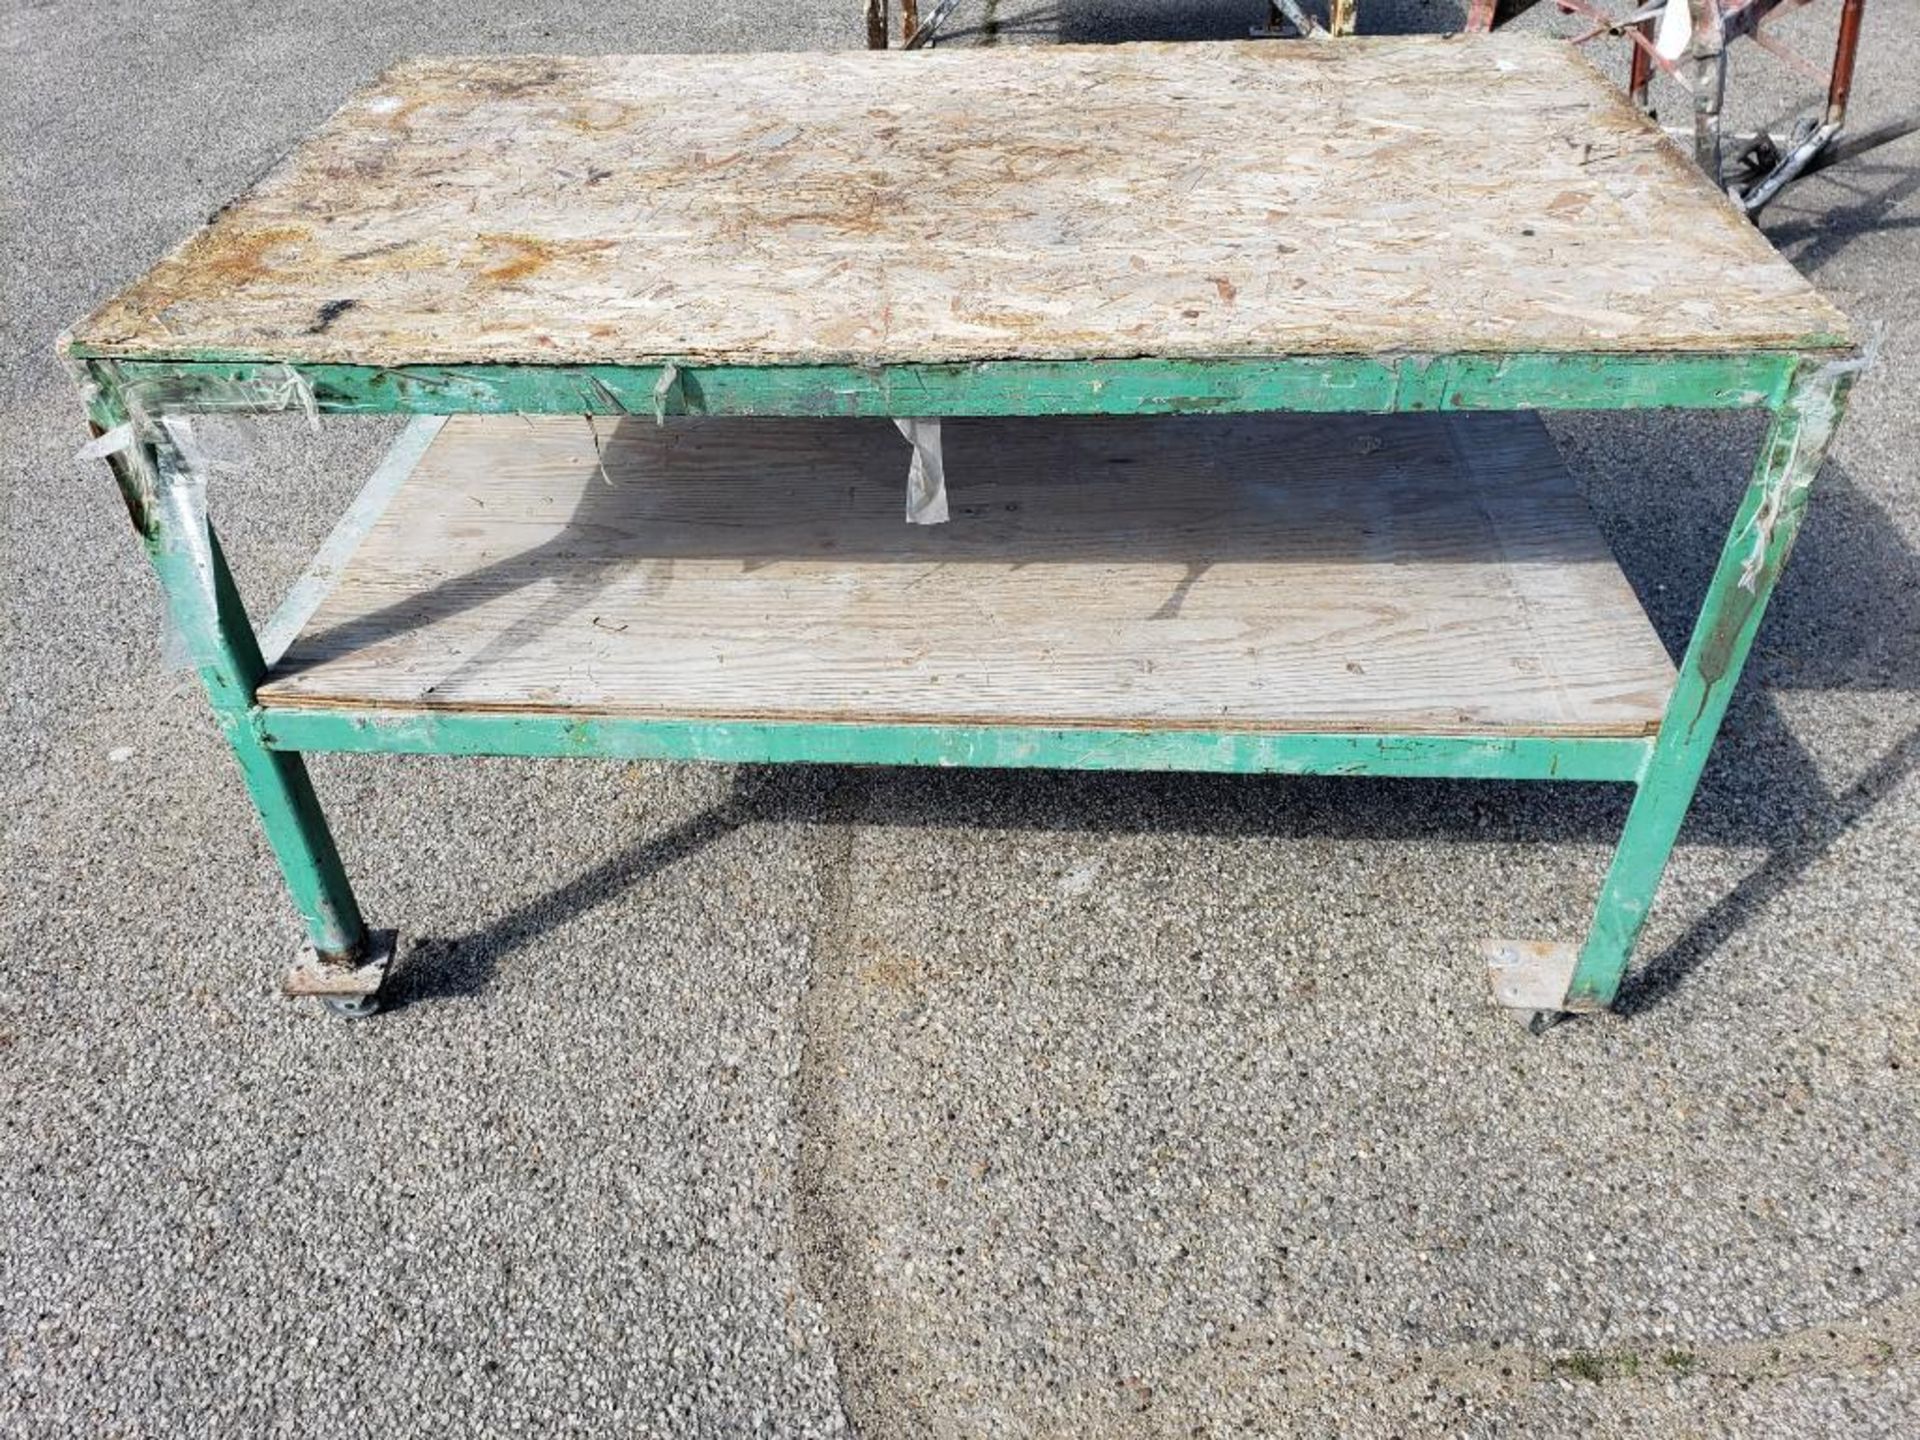 Heavy duty steel and wood table. 60in x 36in x 36in tall.